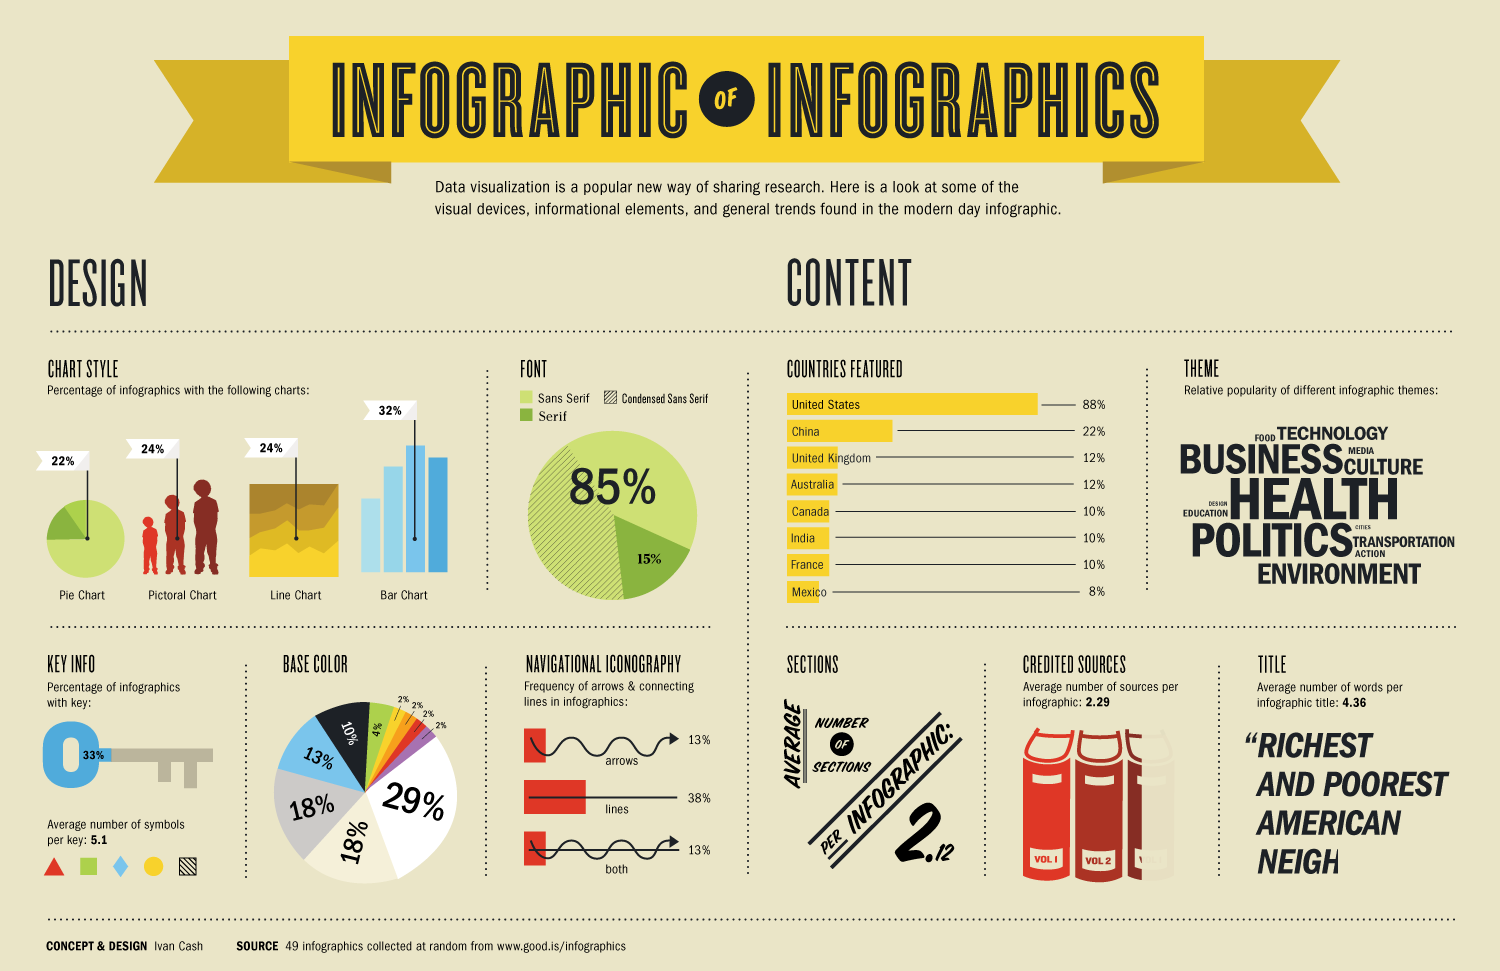 What is infographic ?